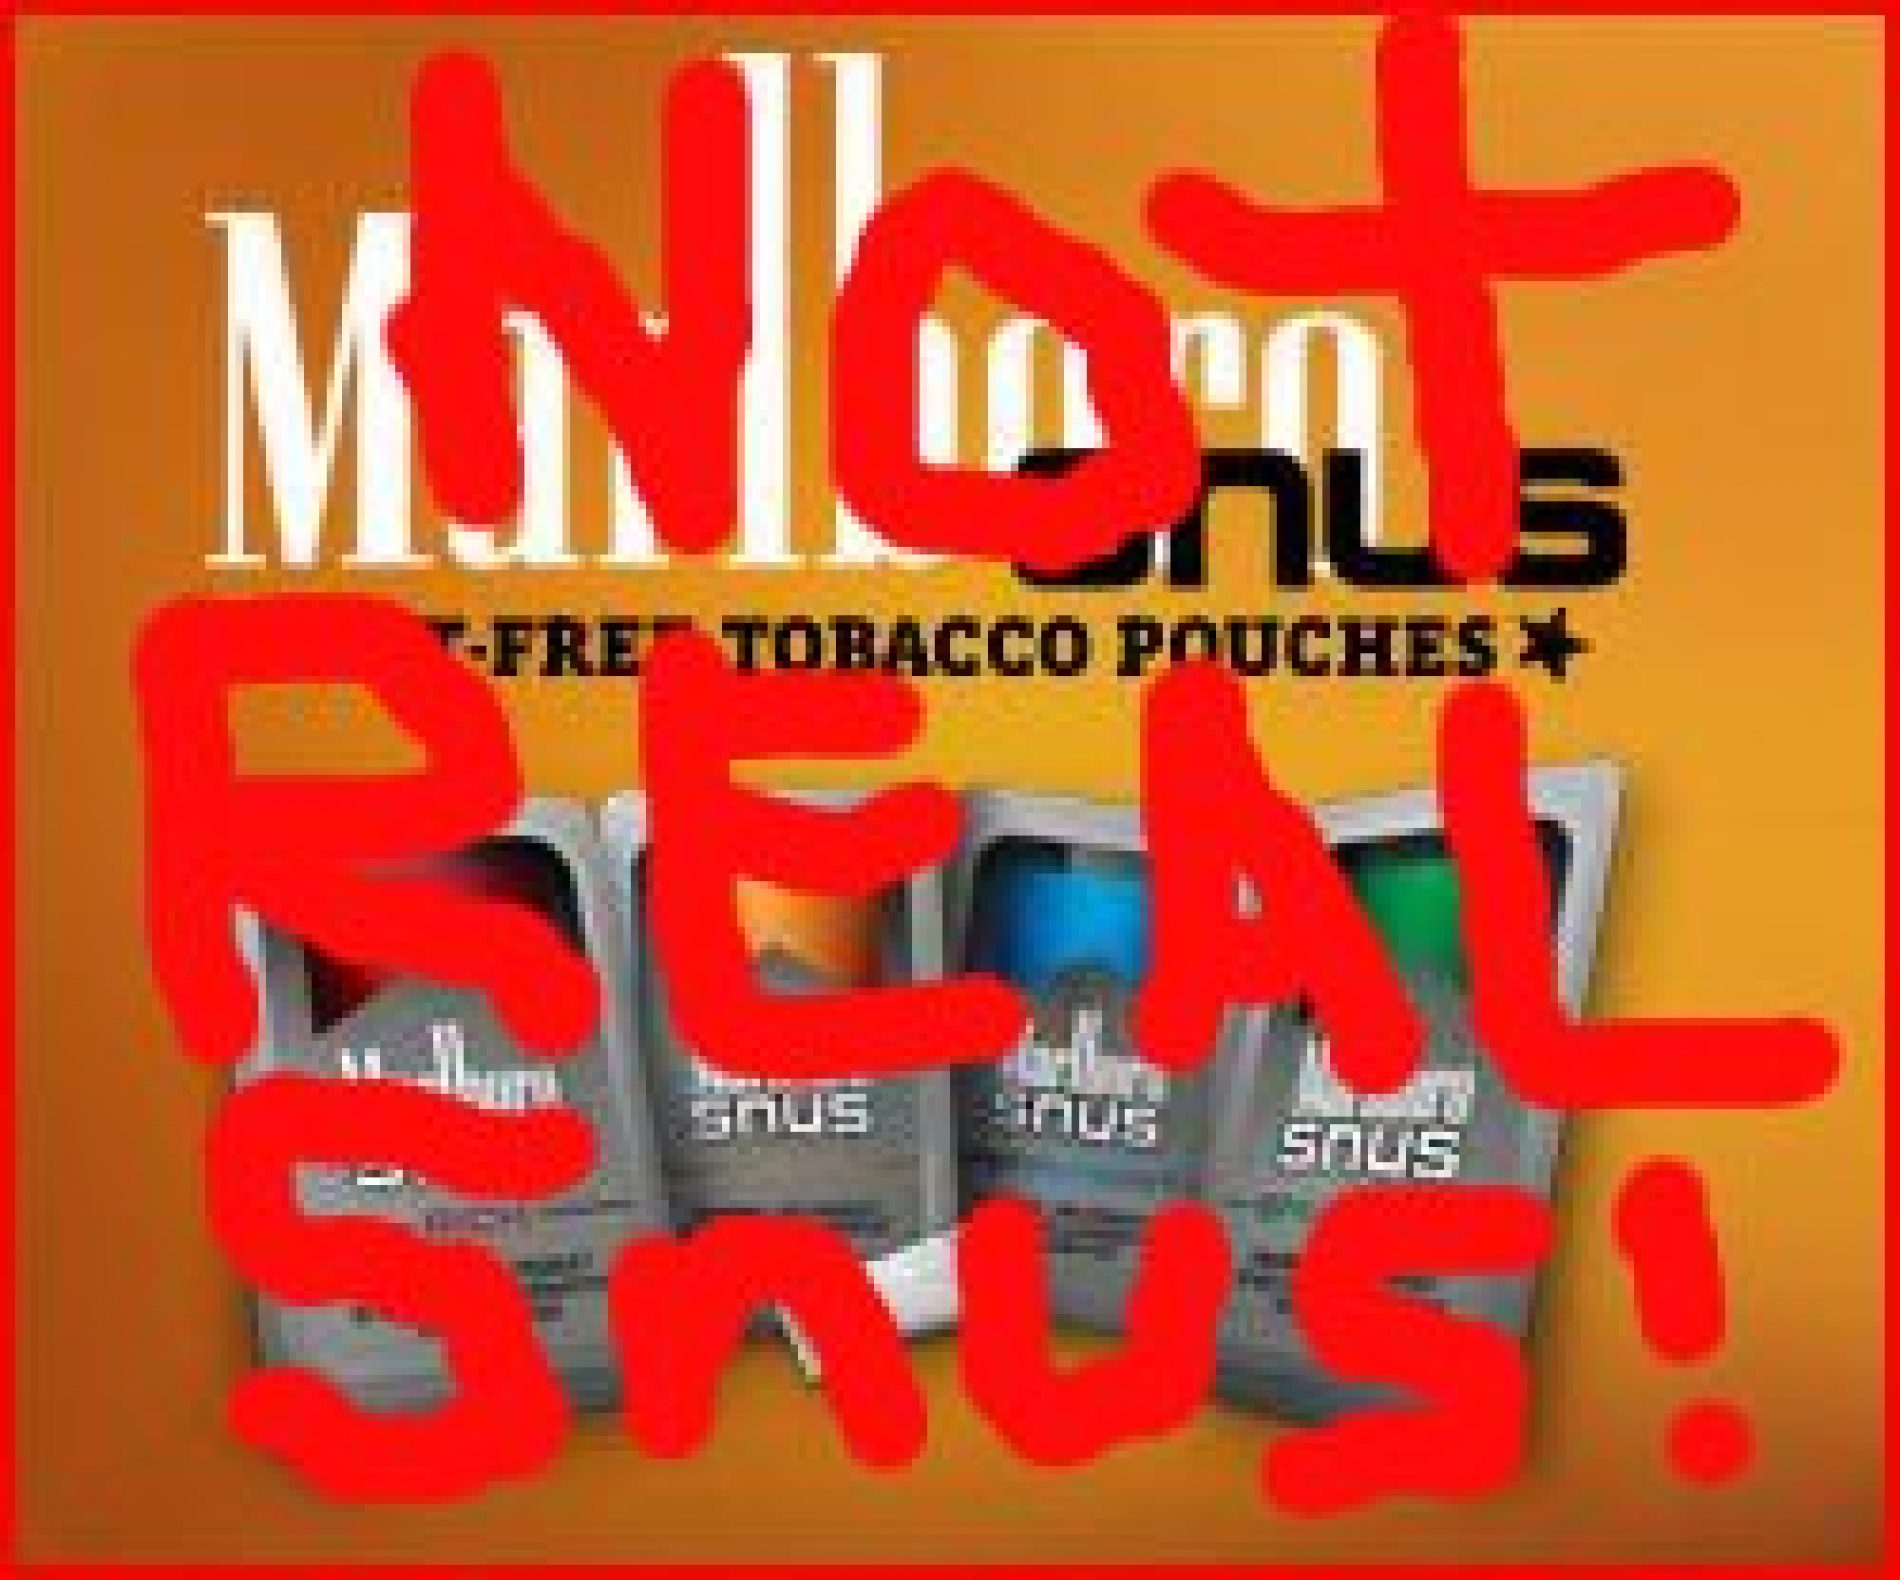 An Open Letter to the American Tobacco Companies